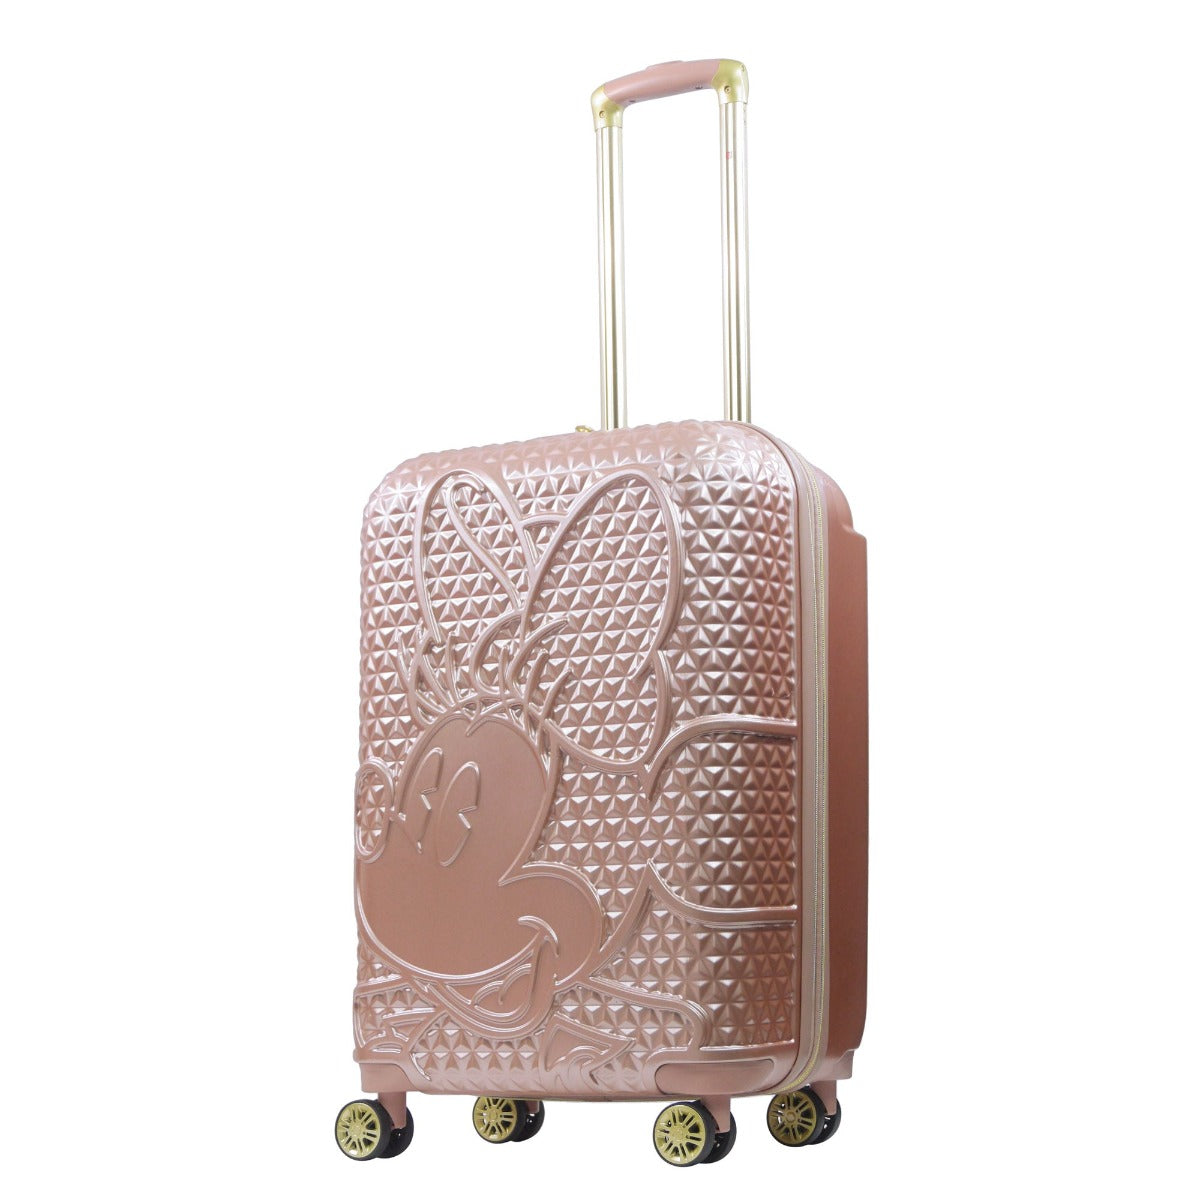 Ful Disney Minnie Mouse 25" luggage spinner rose gold - best hard suitcase for travel